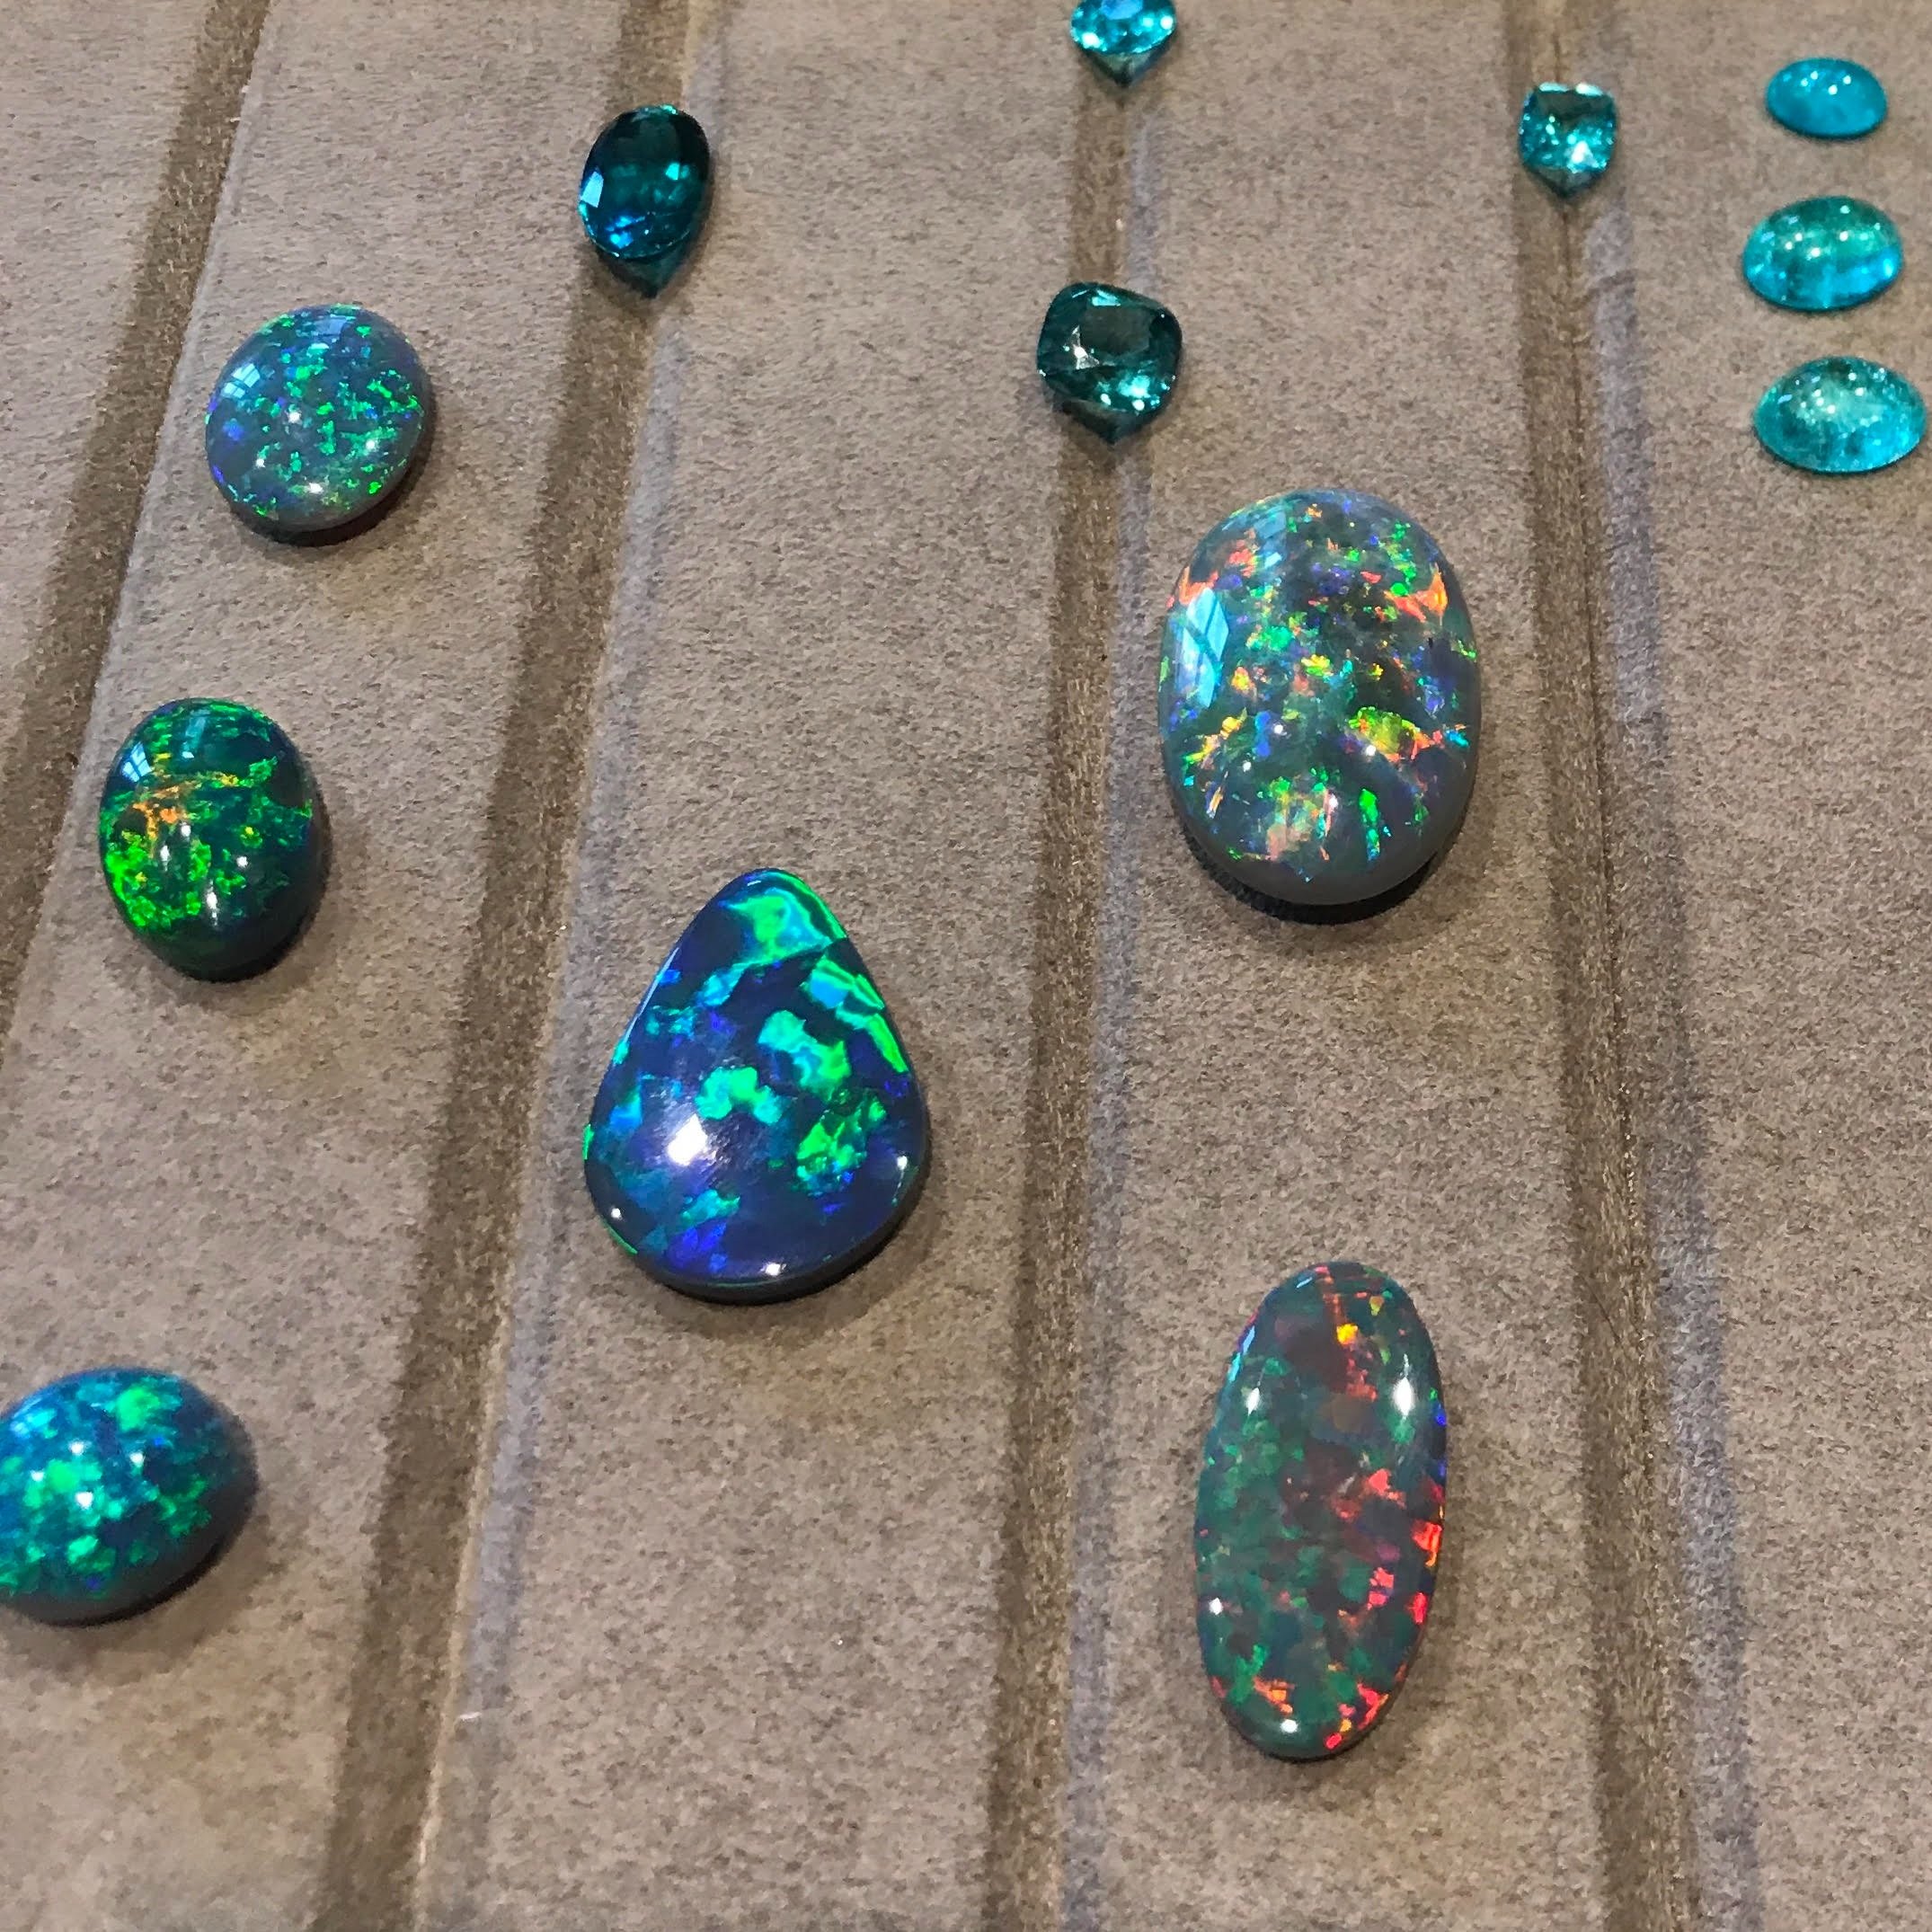 The first piece of jewelry Sarah fell in love with: Opals